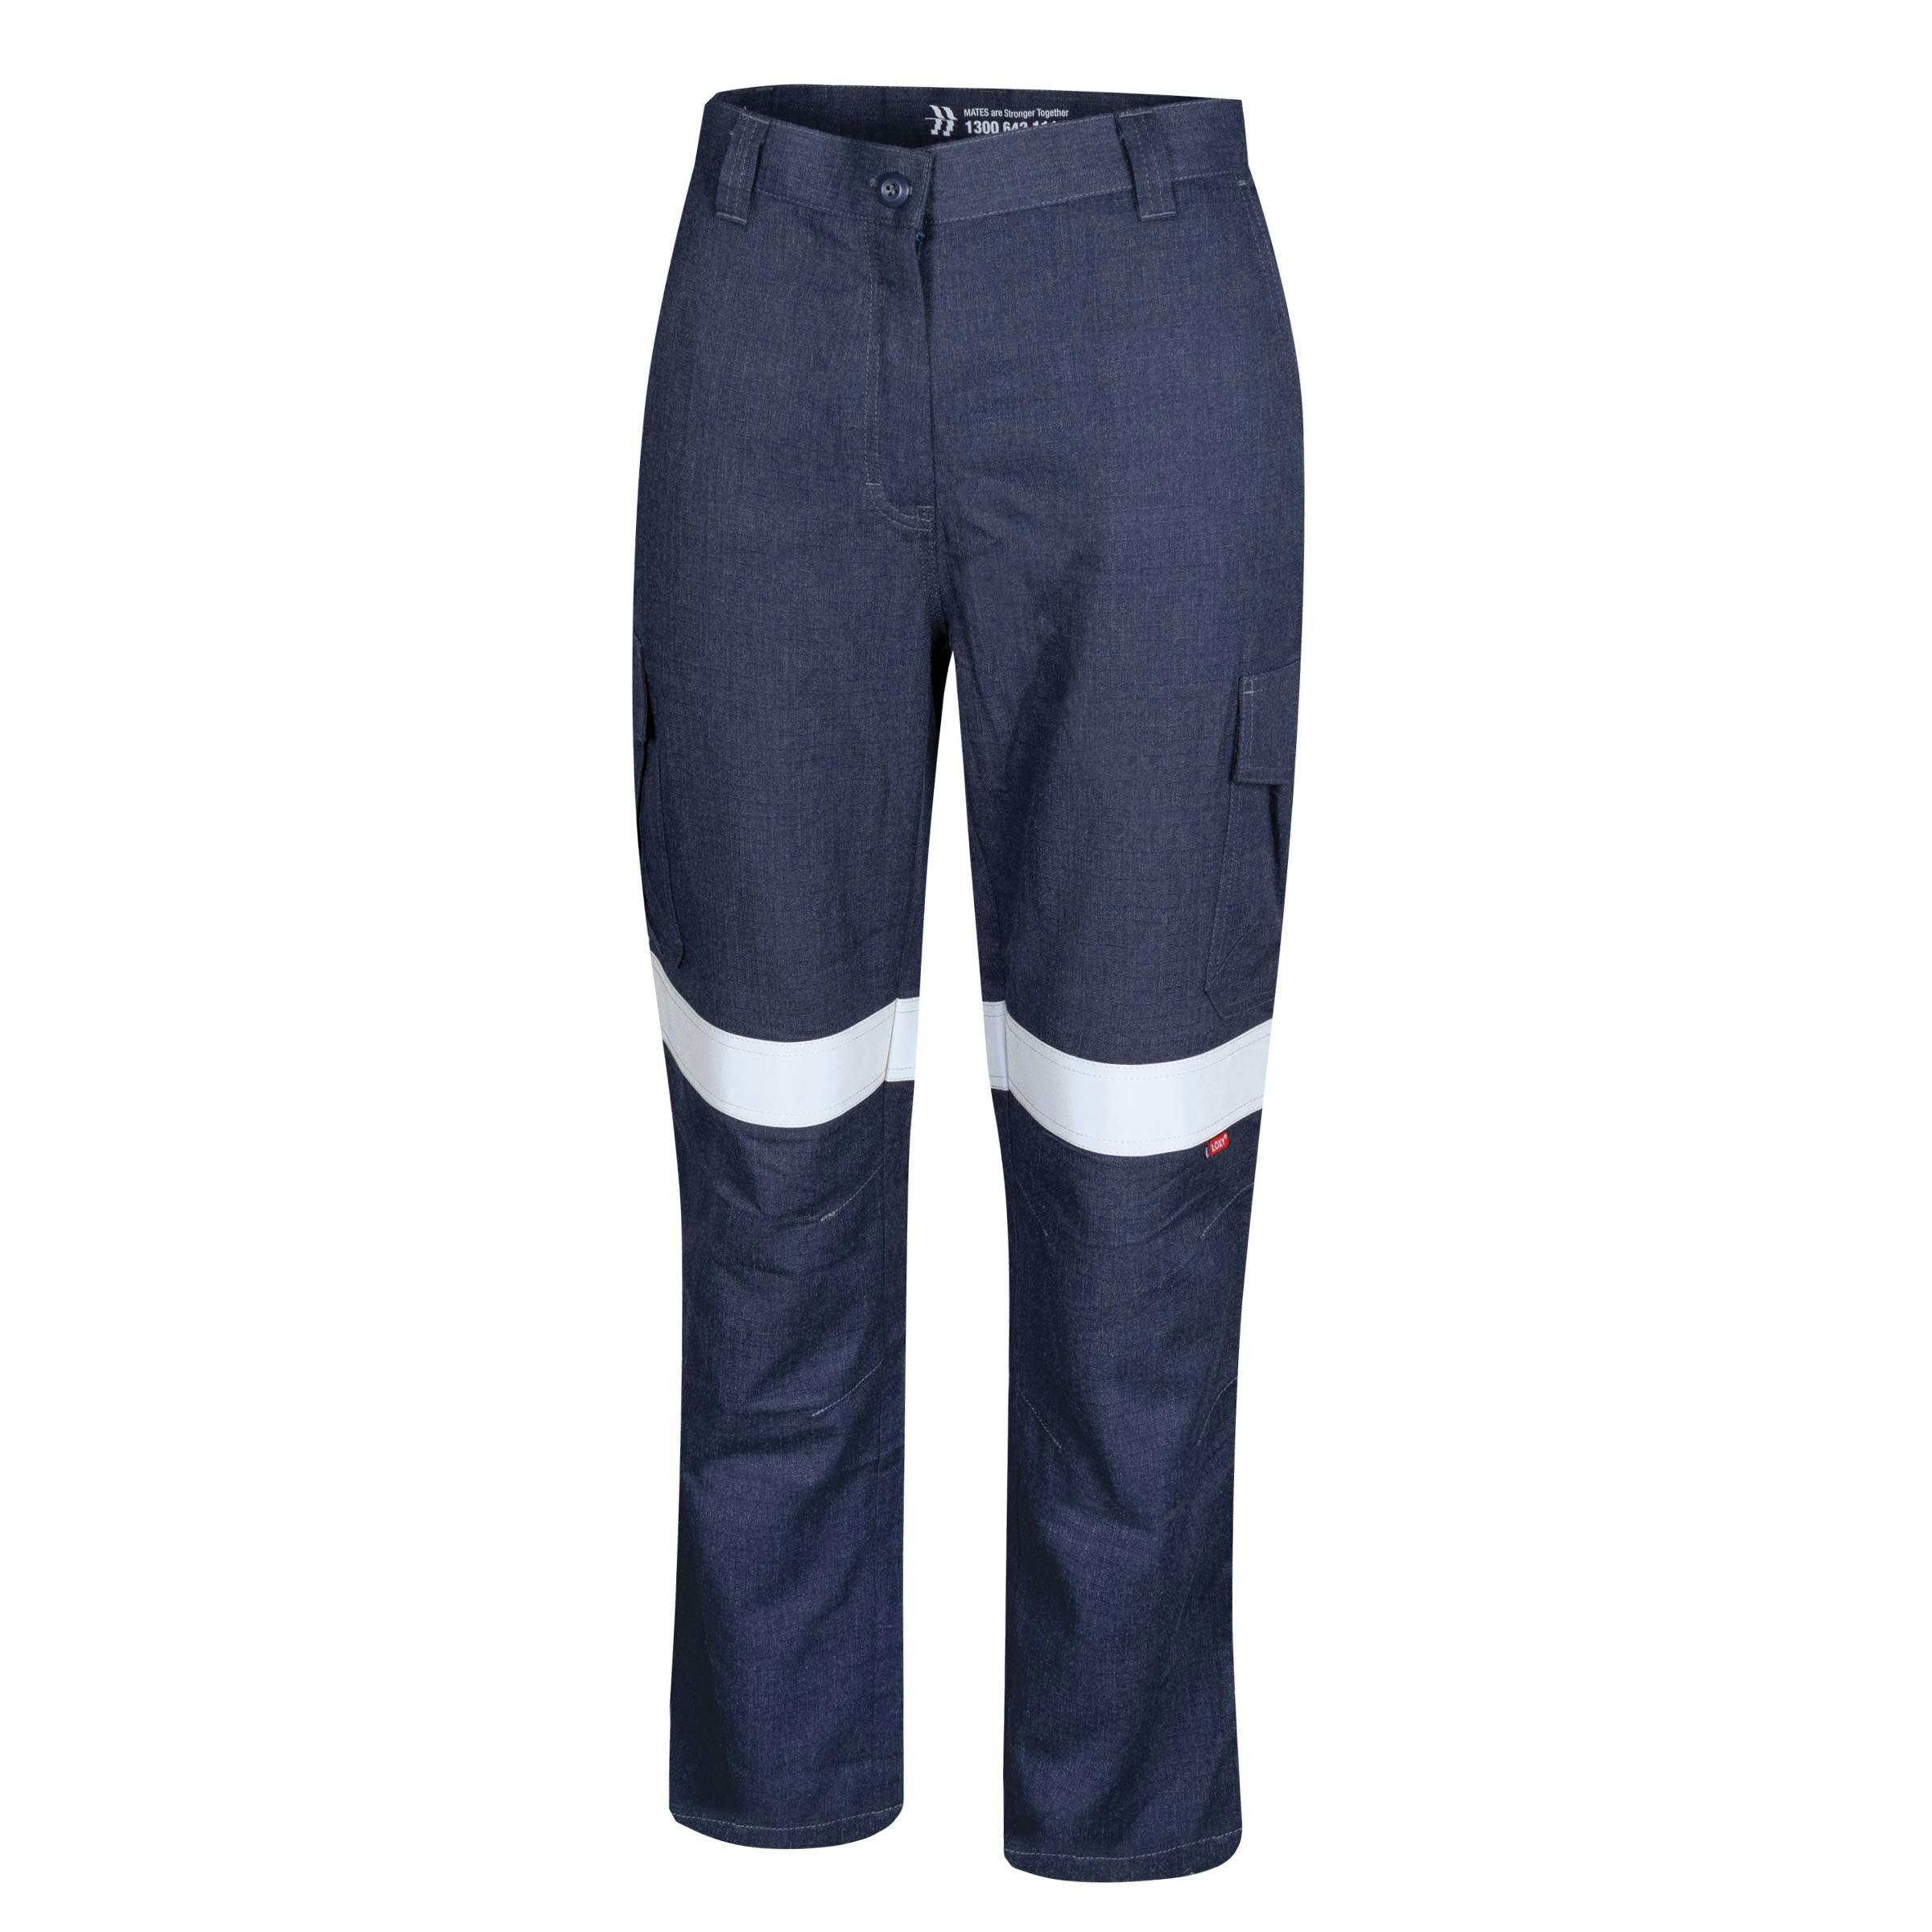 Bool PT Trousers Cargo Ladies 197gsm Parvotex 2.0 Fire Retardent With Loxy FR 9801 Reflective Tape